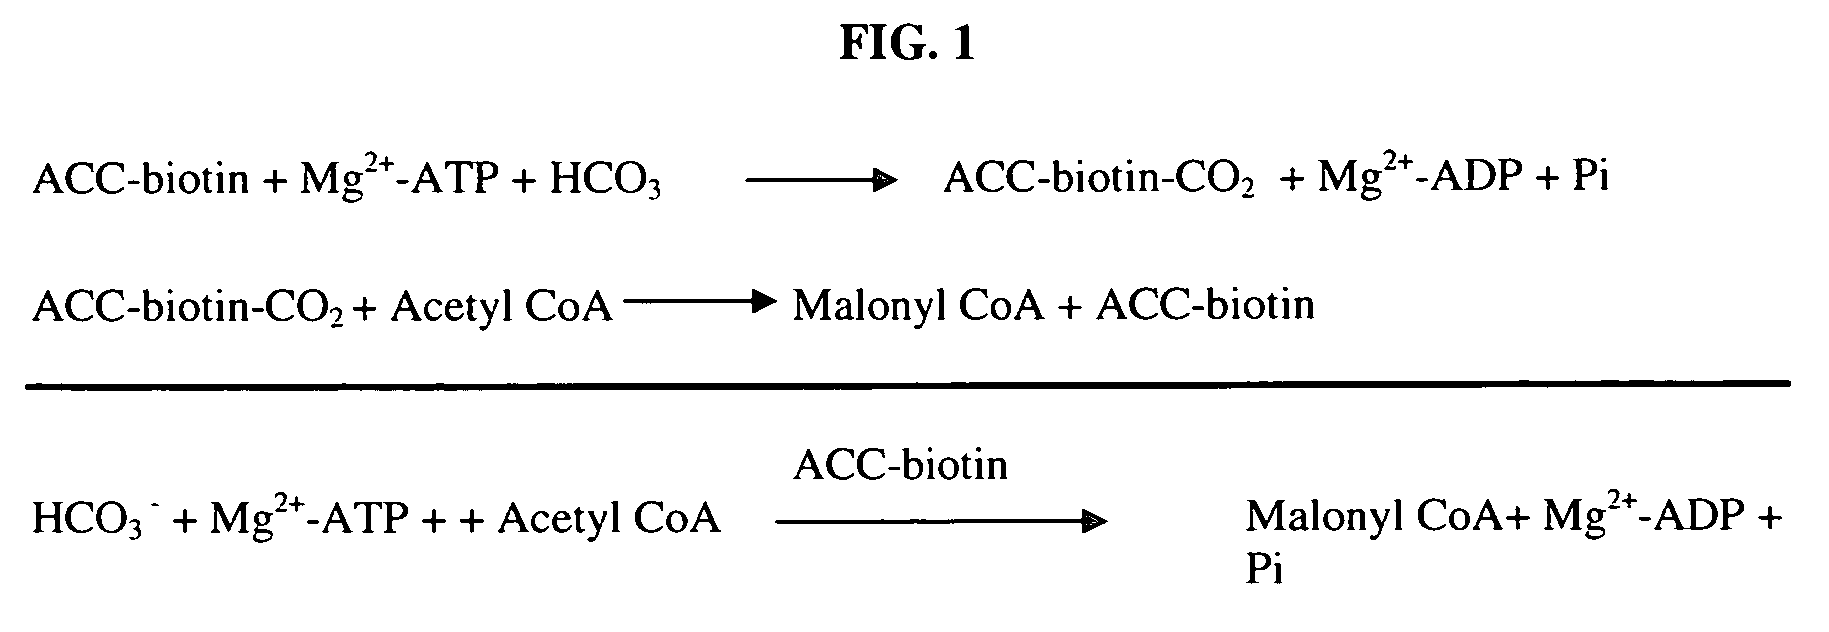 Scintillation proximity assay method of measuring acetyl CoA carboxylase enzyme activity